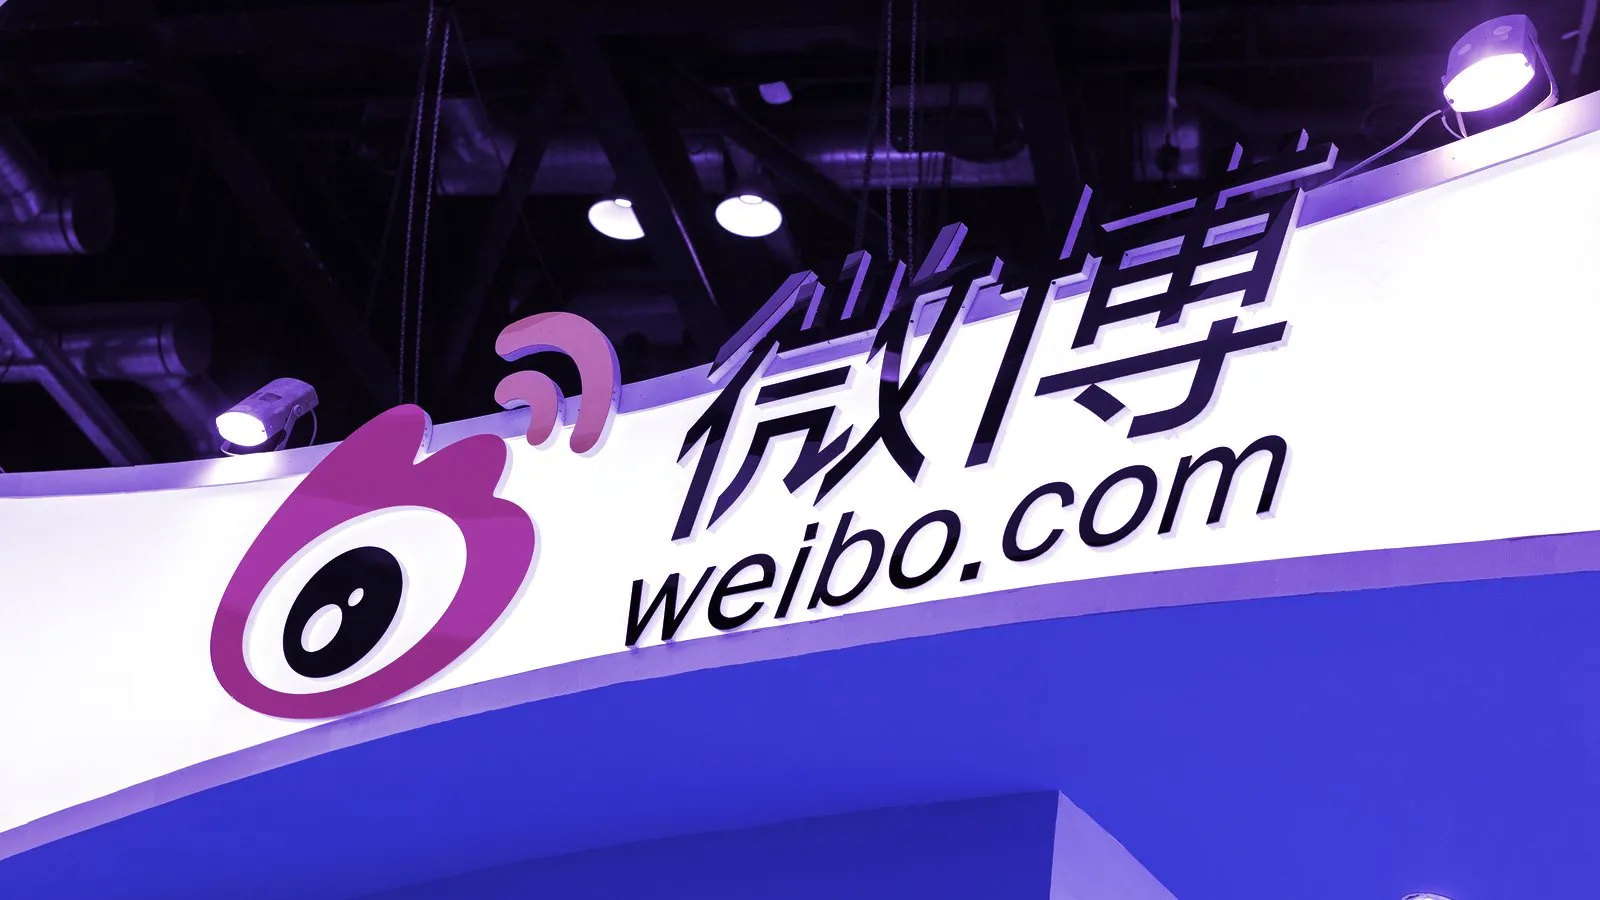 Weibo is one of China's largest social media platforms. Image: Shutterstock